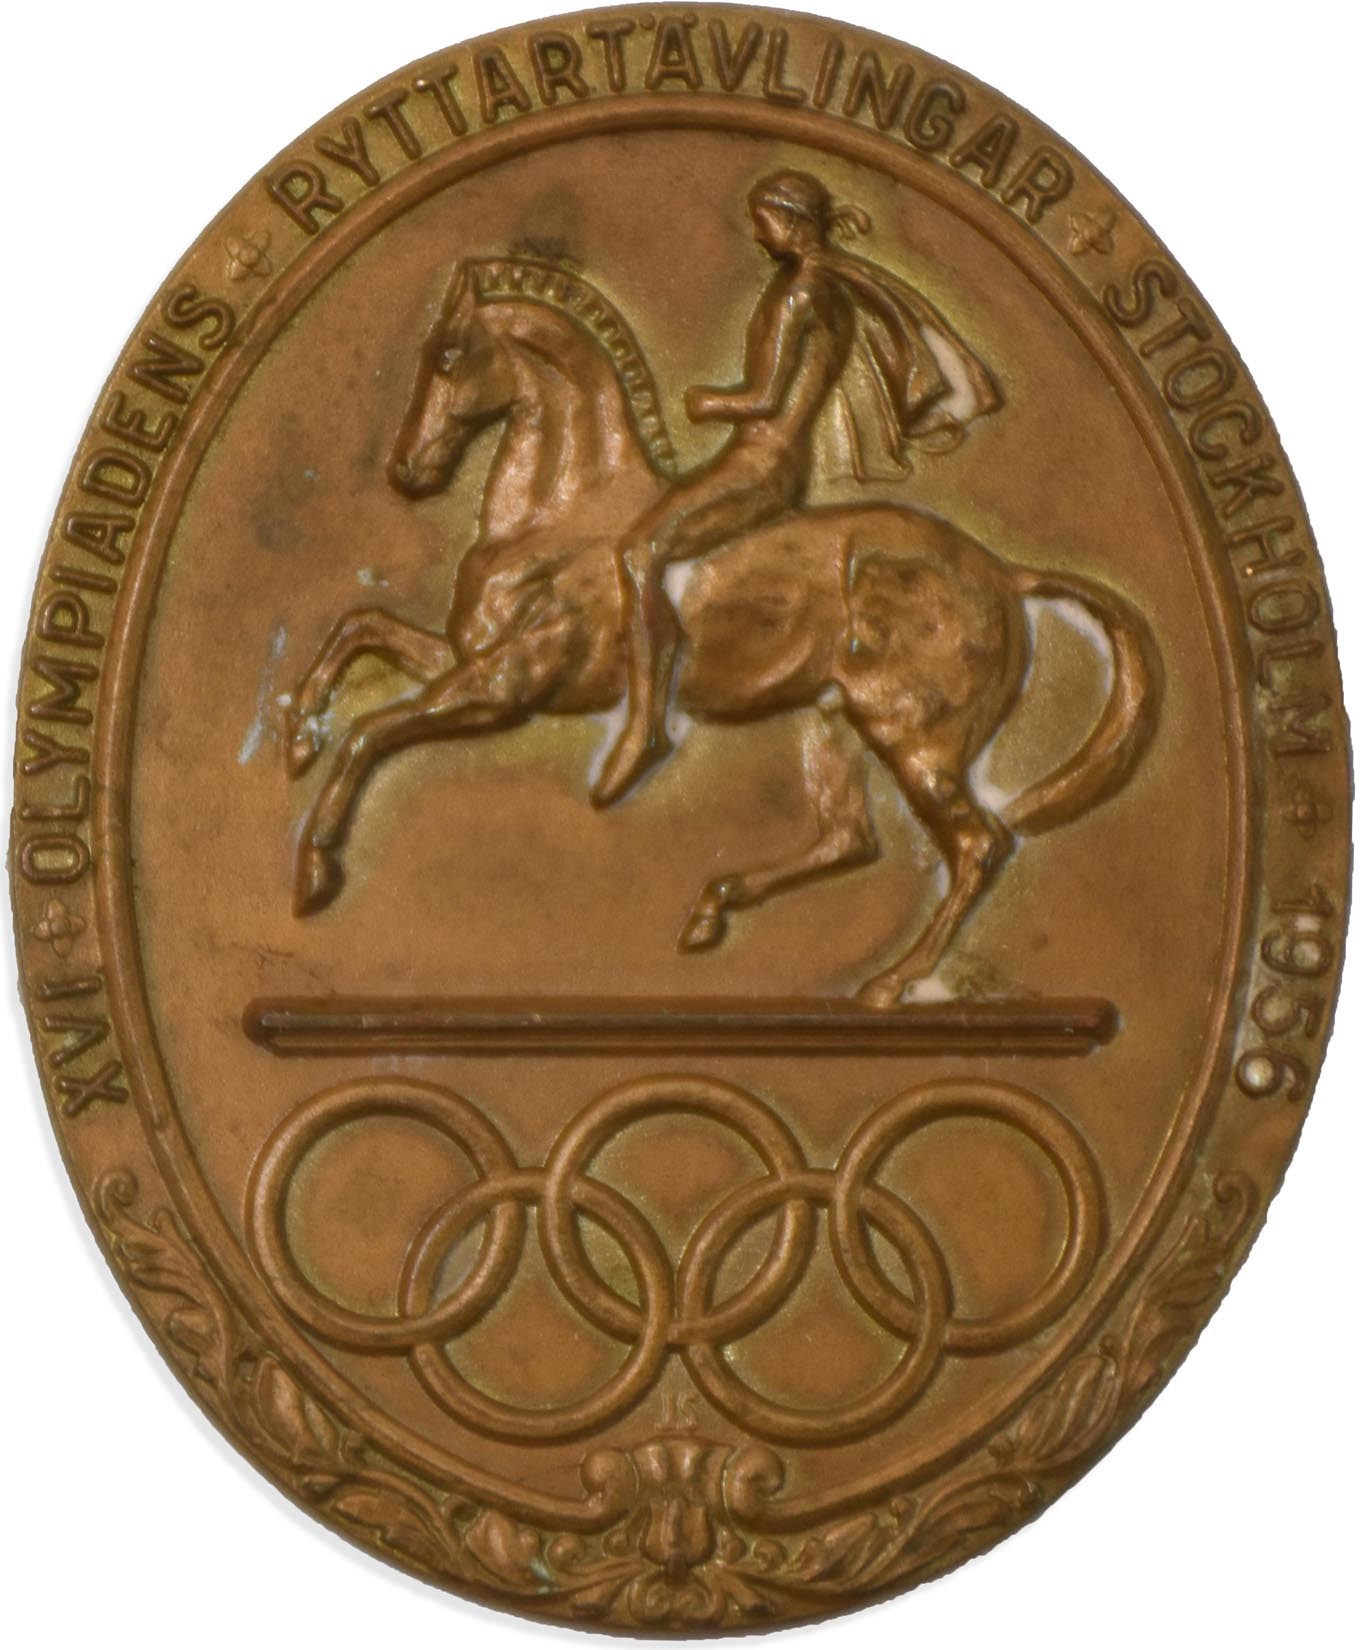 1956 Melbourne Summer Olympics Equestrian Participation Medal - Held in Stockholm